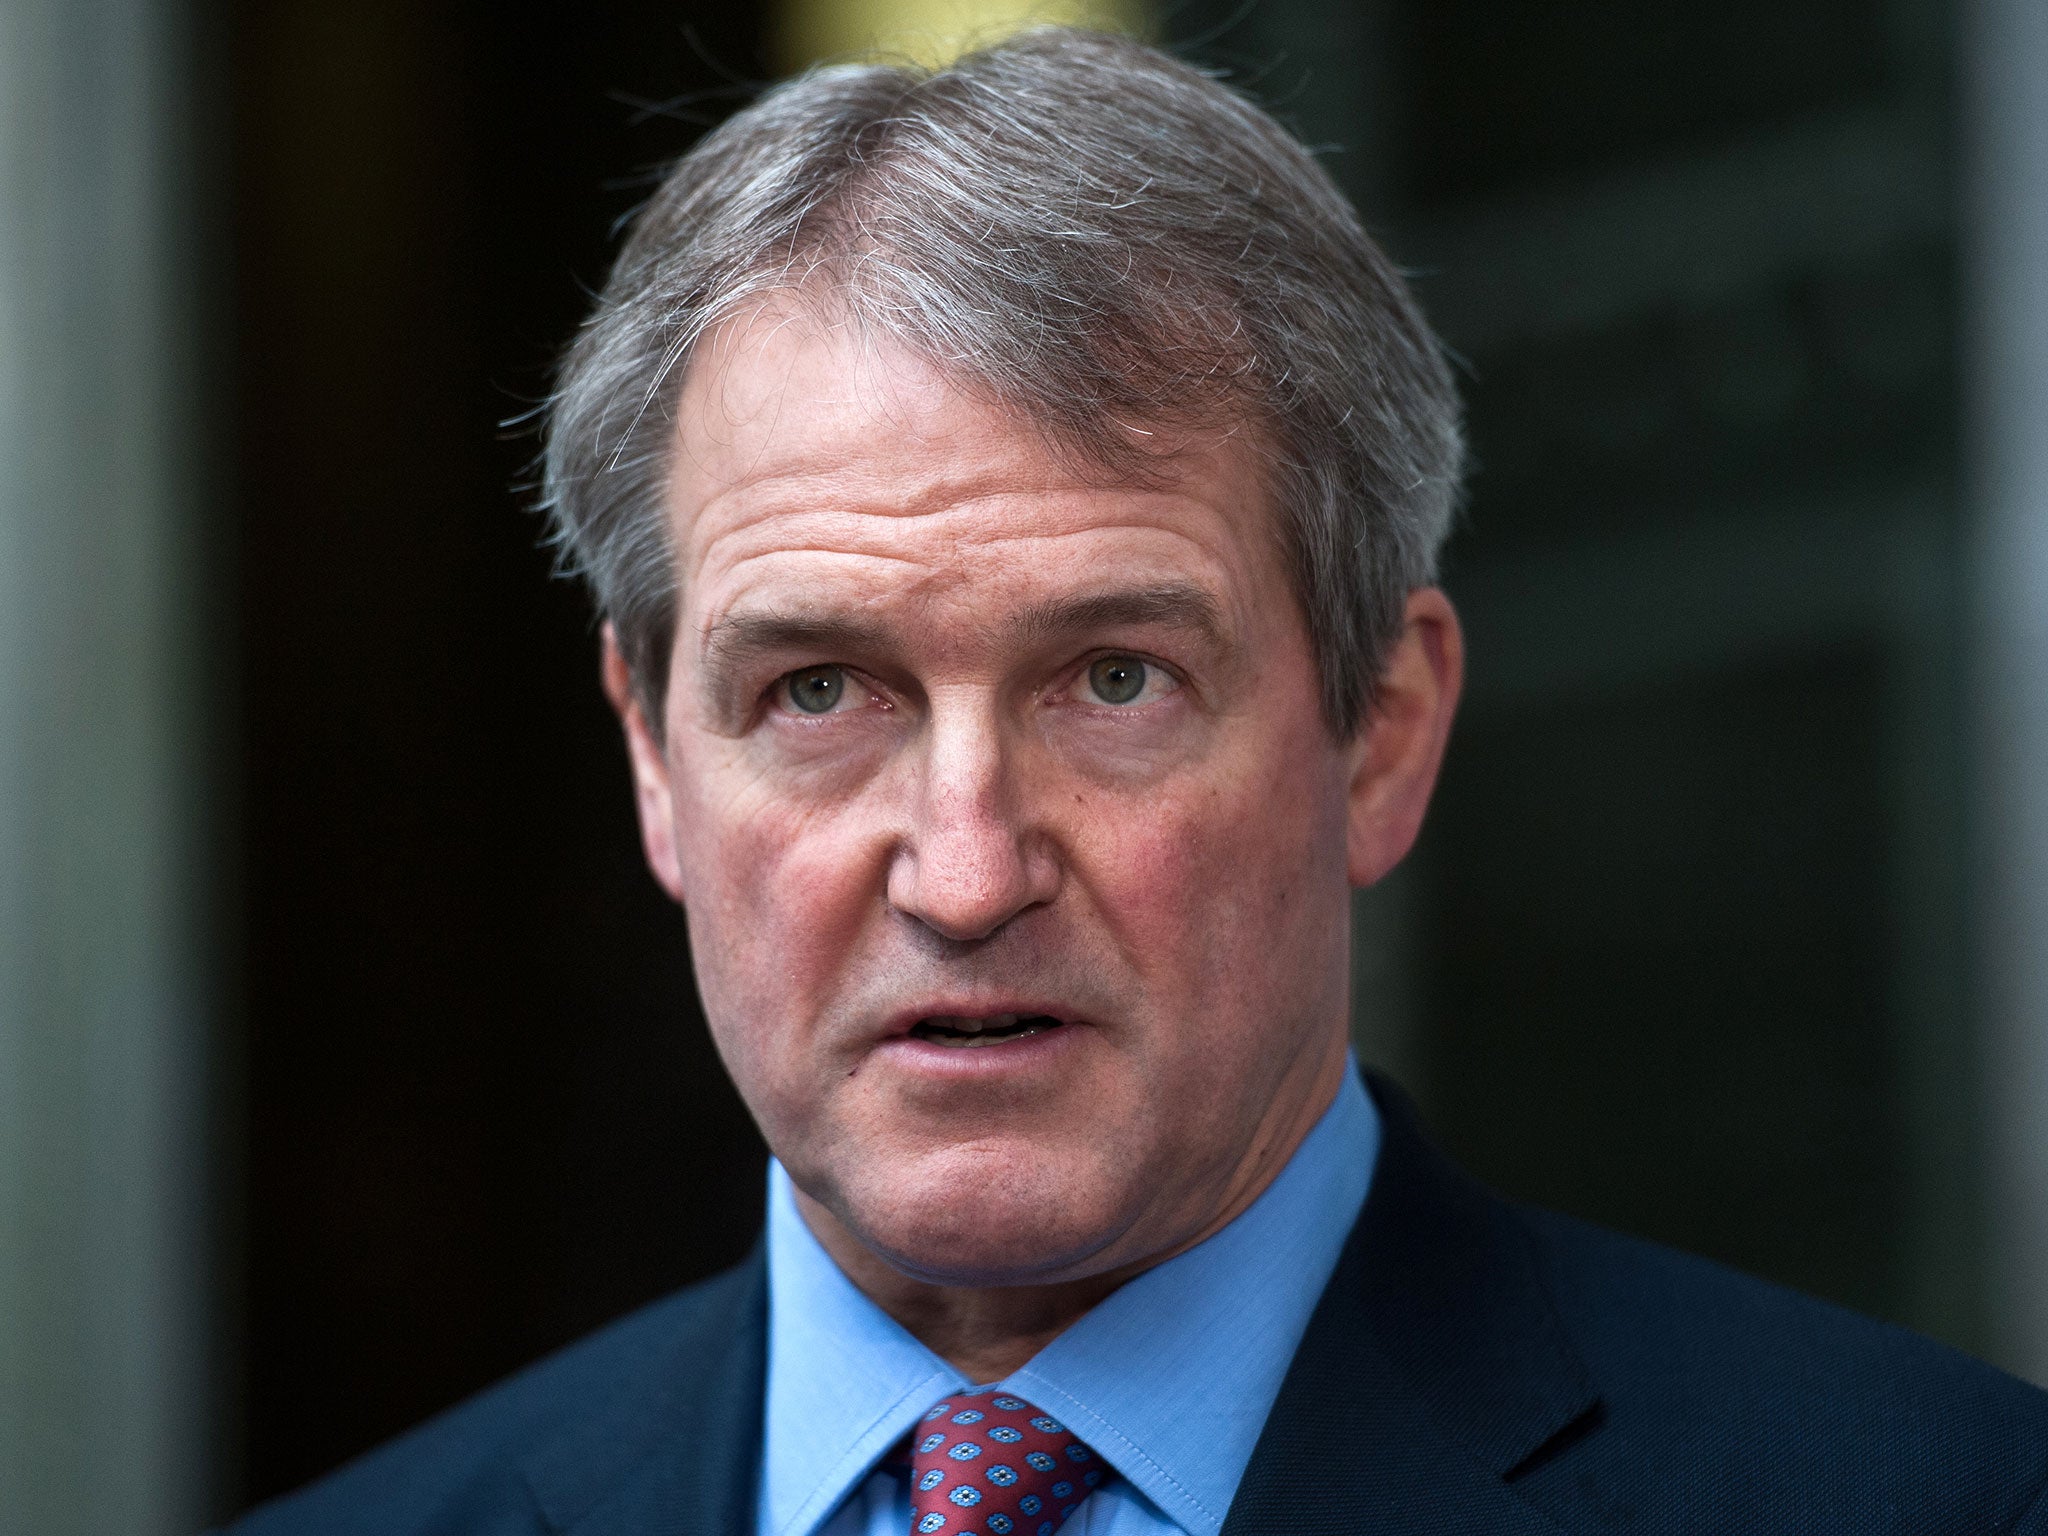 Owen Paterson was sacked as Environment Secretary in July